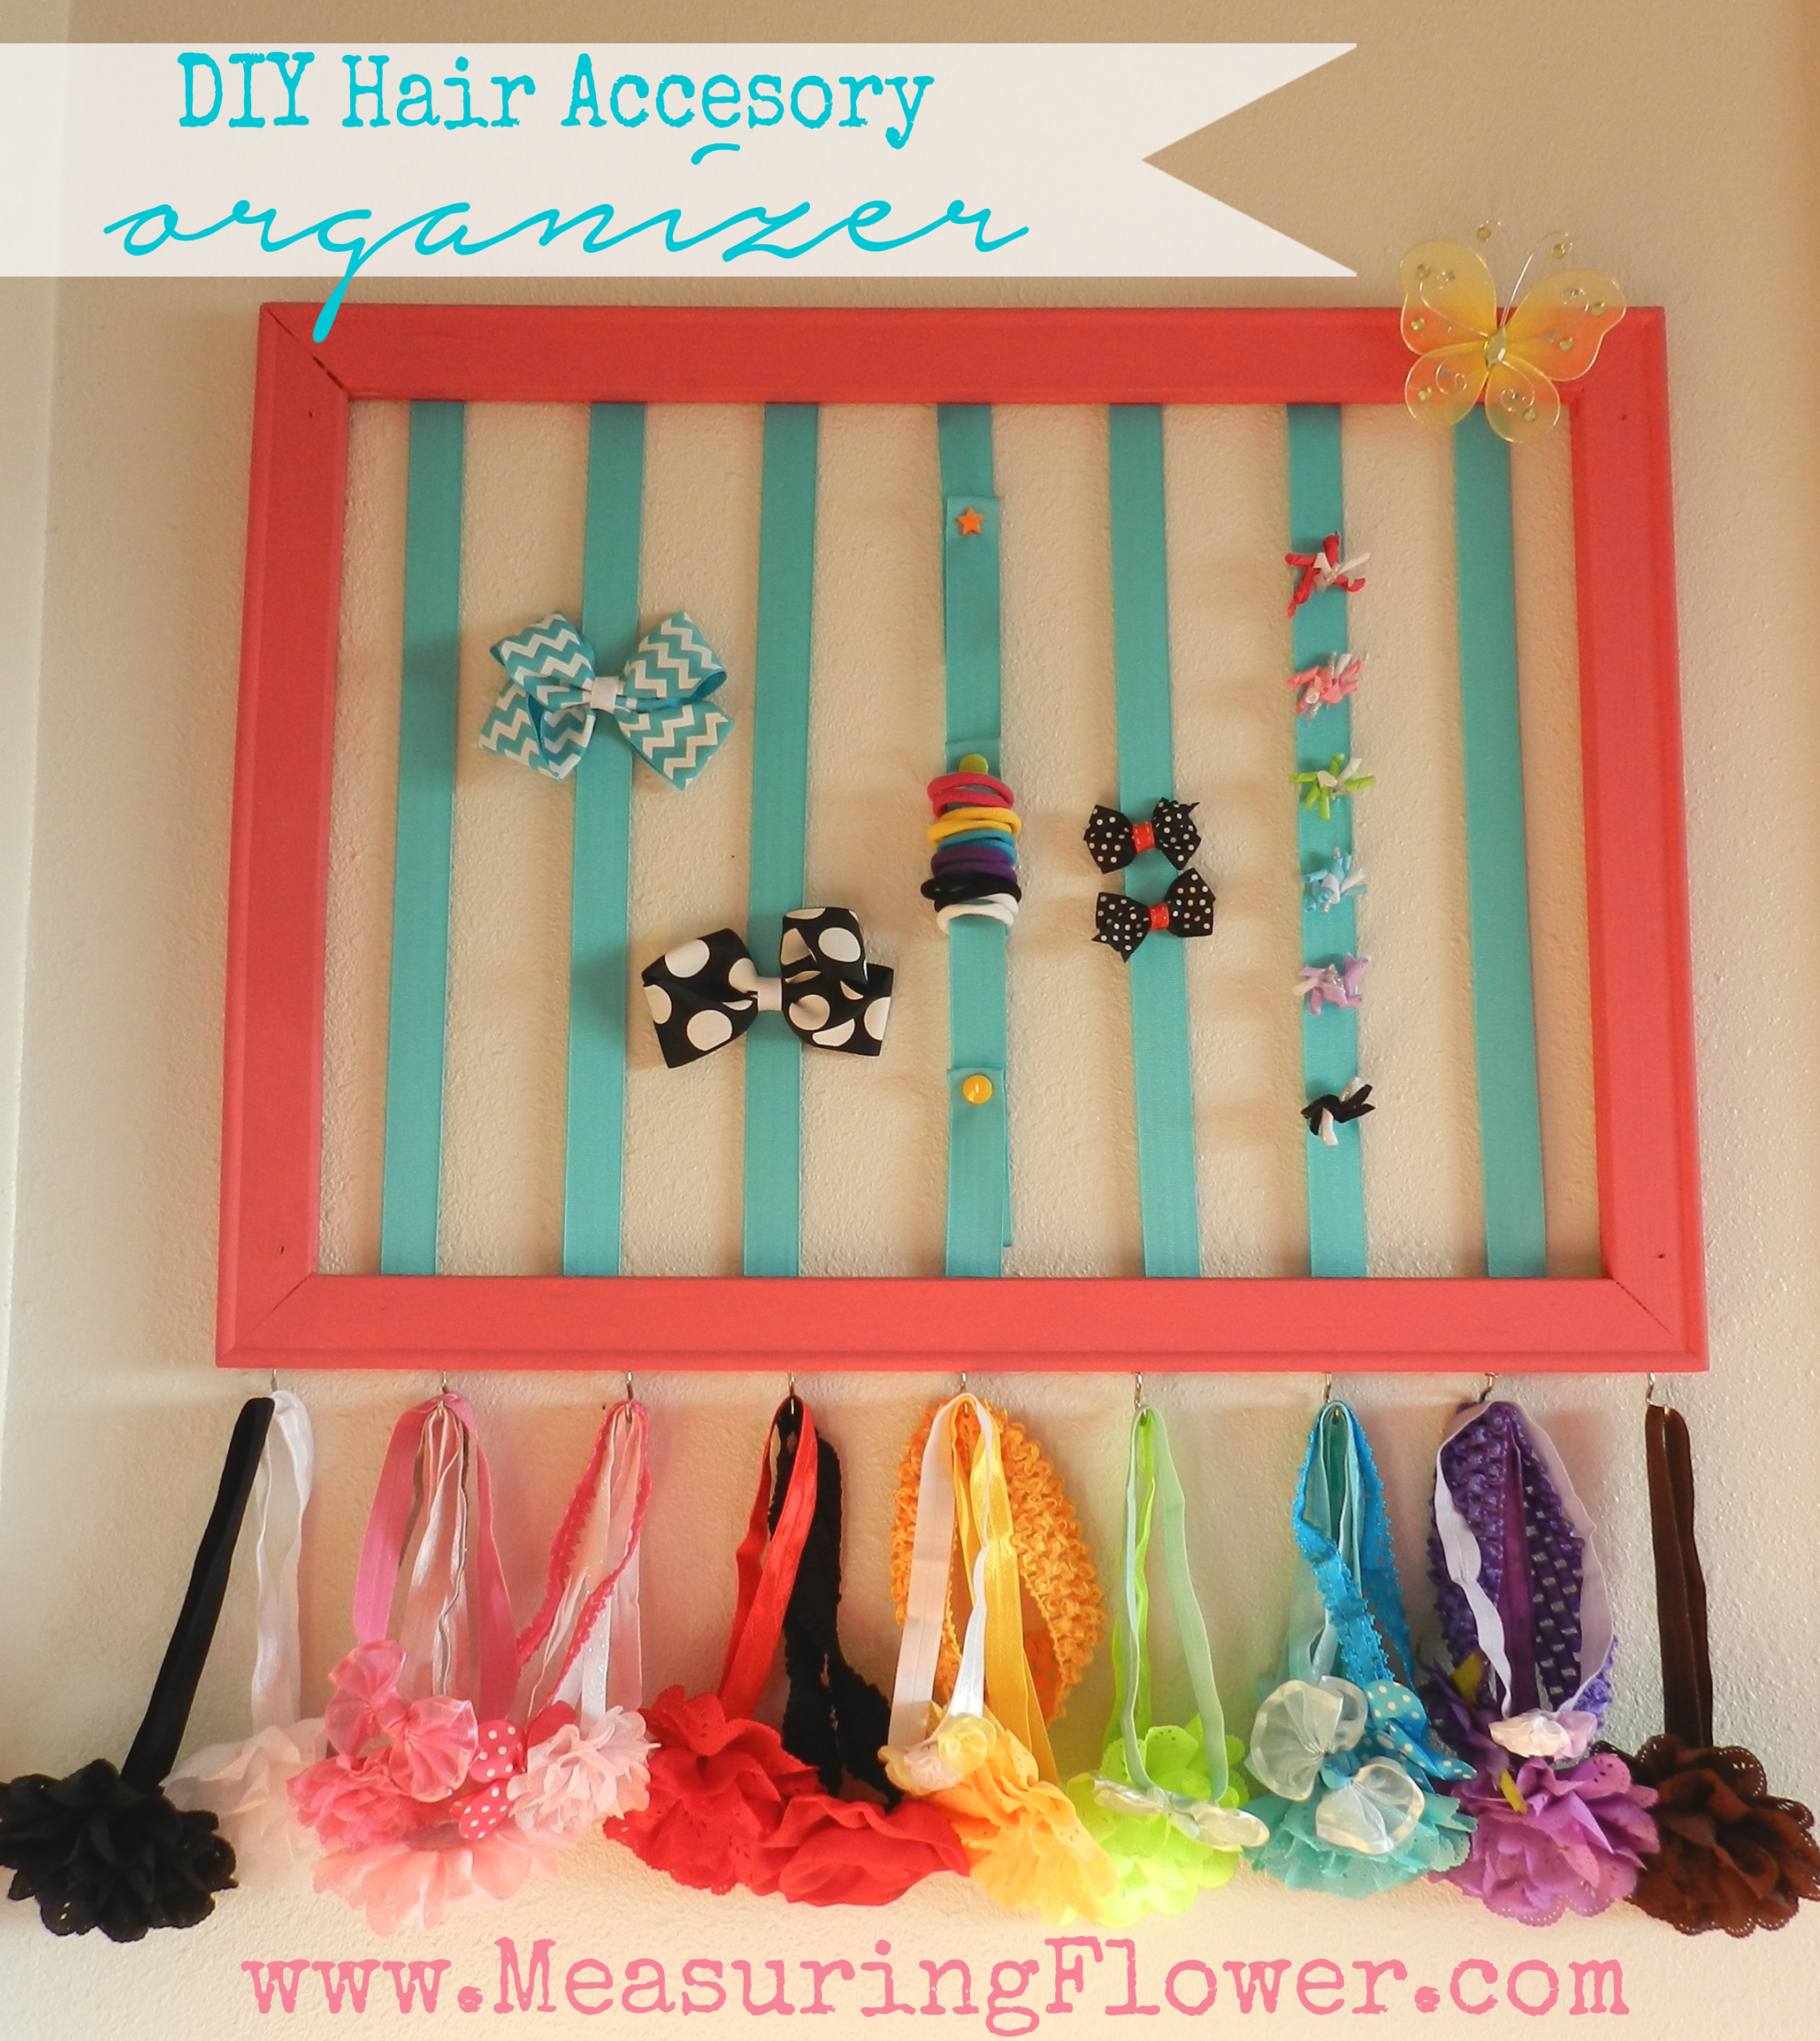 DIY Hair Accessories Holder
 DIY Hair Accessory Organizer for Baby and Little Girls